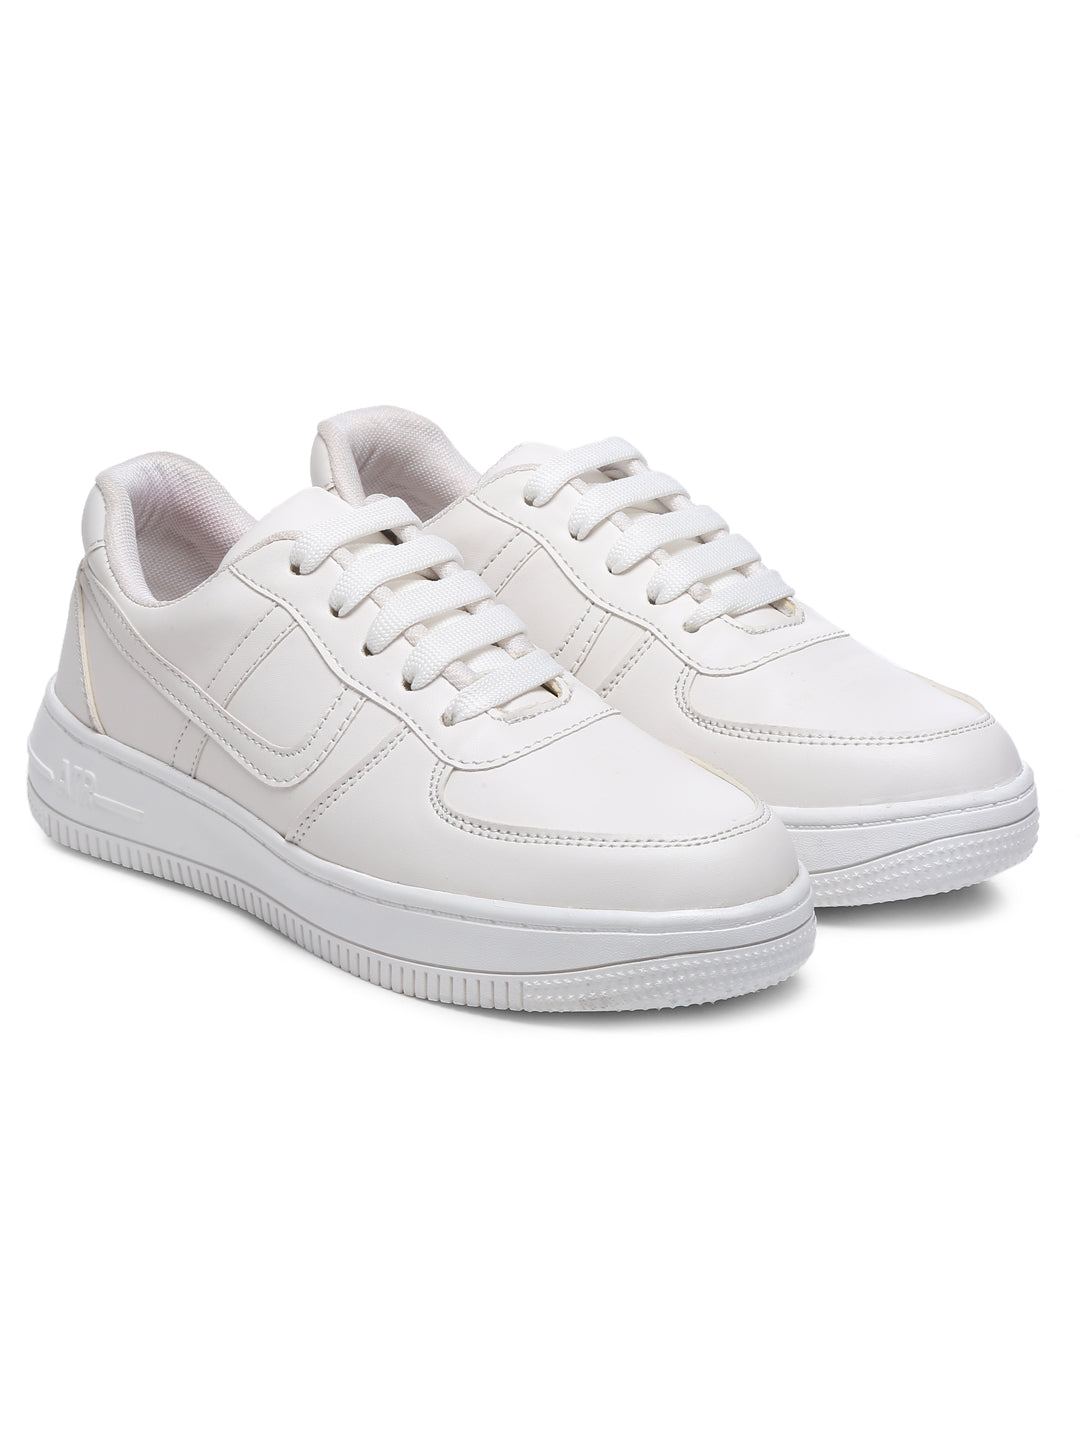 GNIST White Chunky Sneakers